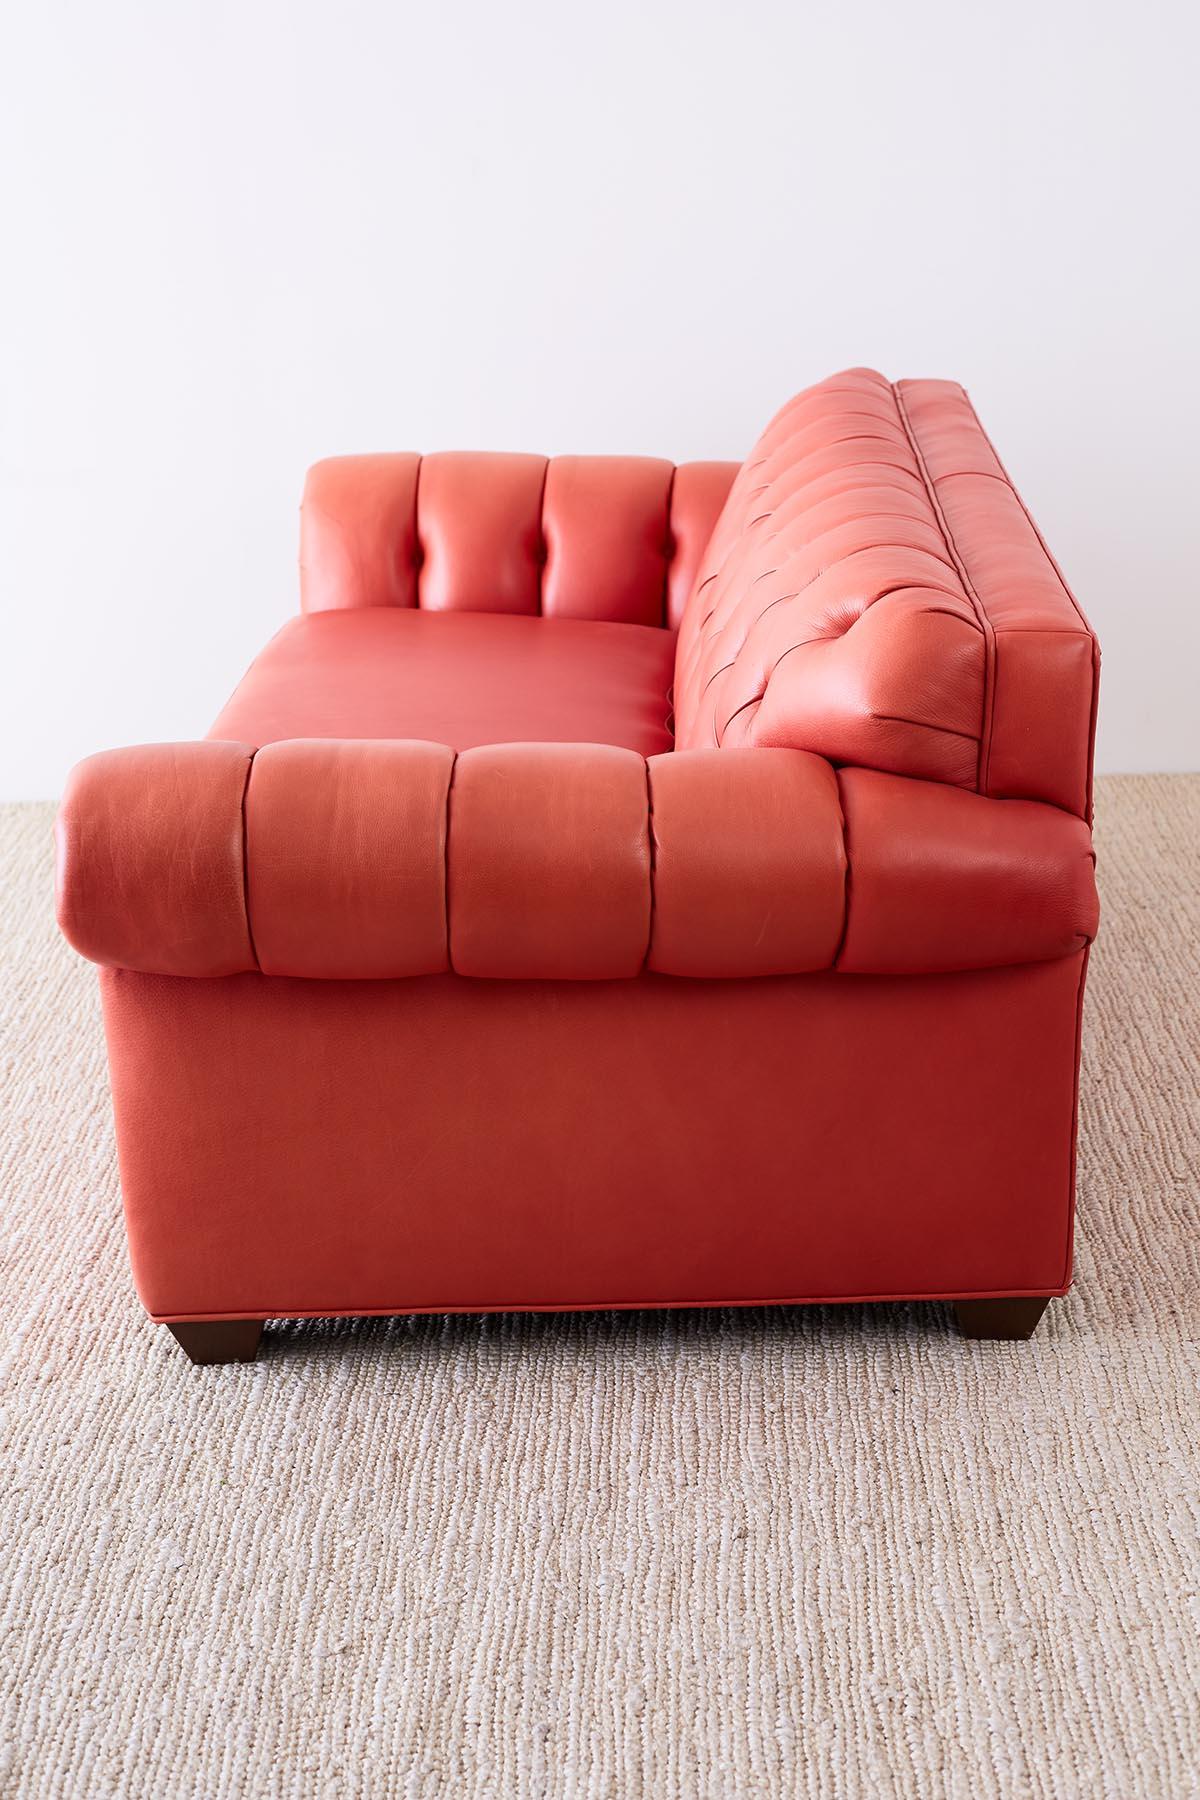 Coral Red Leather Tufted Chesterfield Sofa Settee 1